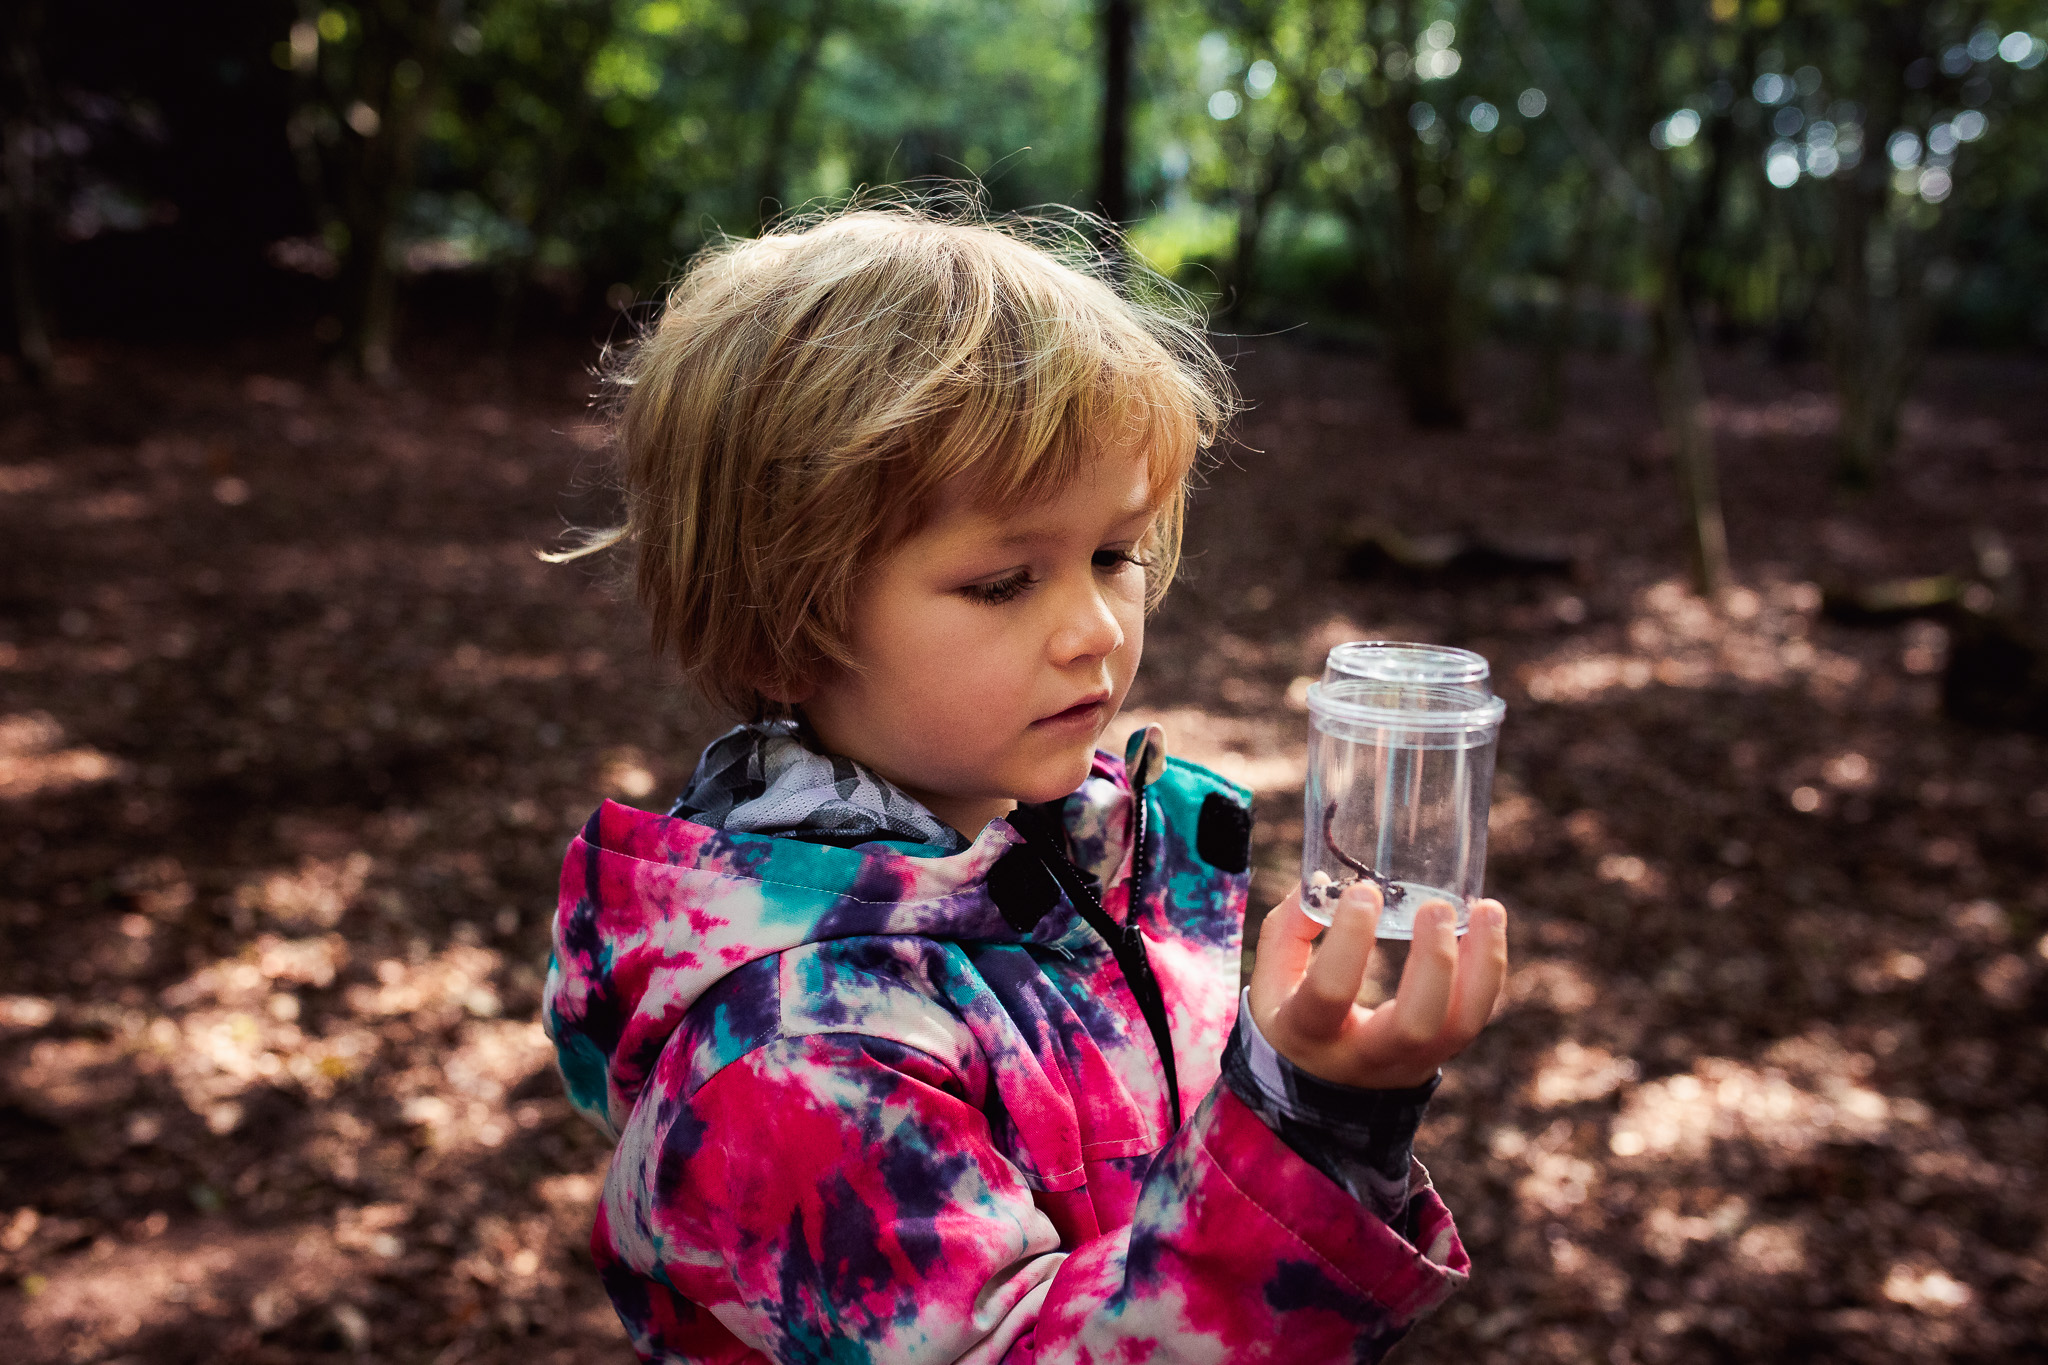 Kai is holding and looking at a worm in a jar in a forest during a family photo session.